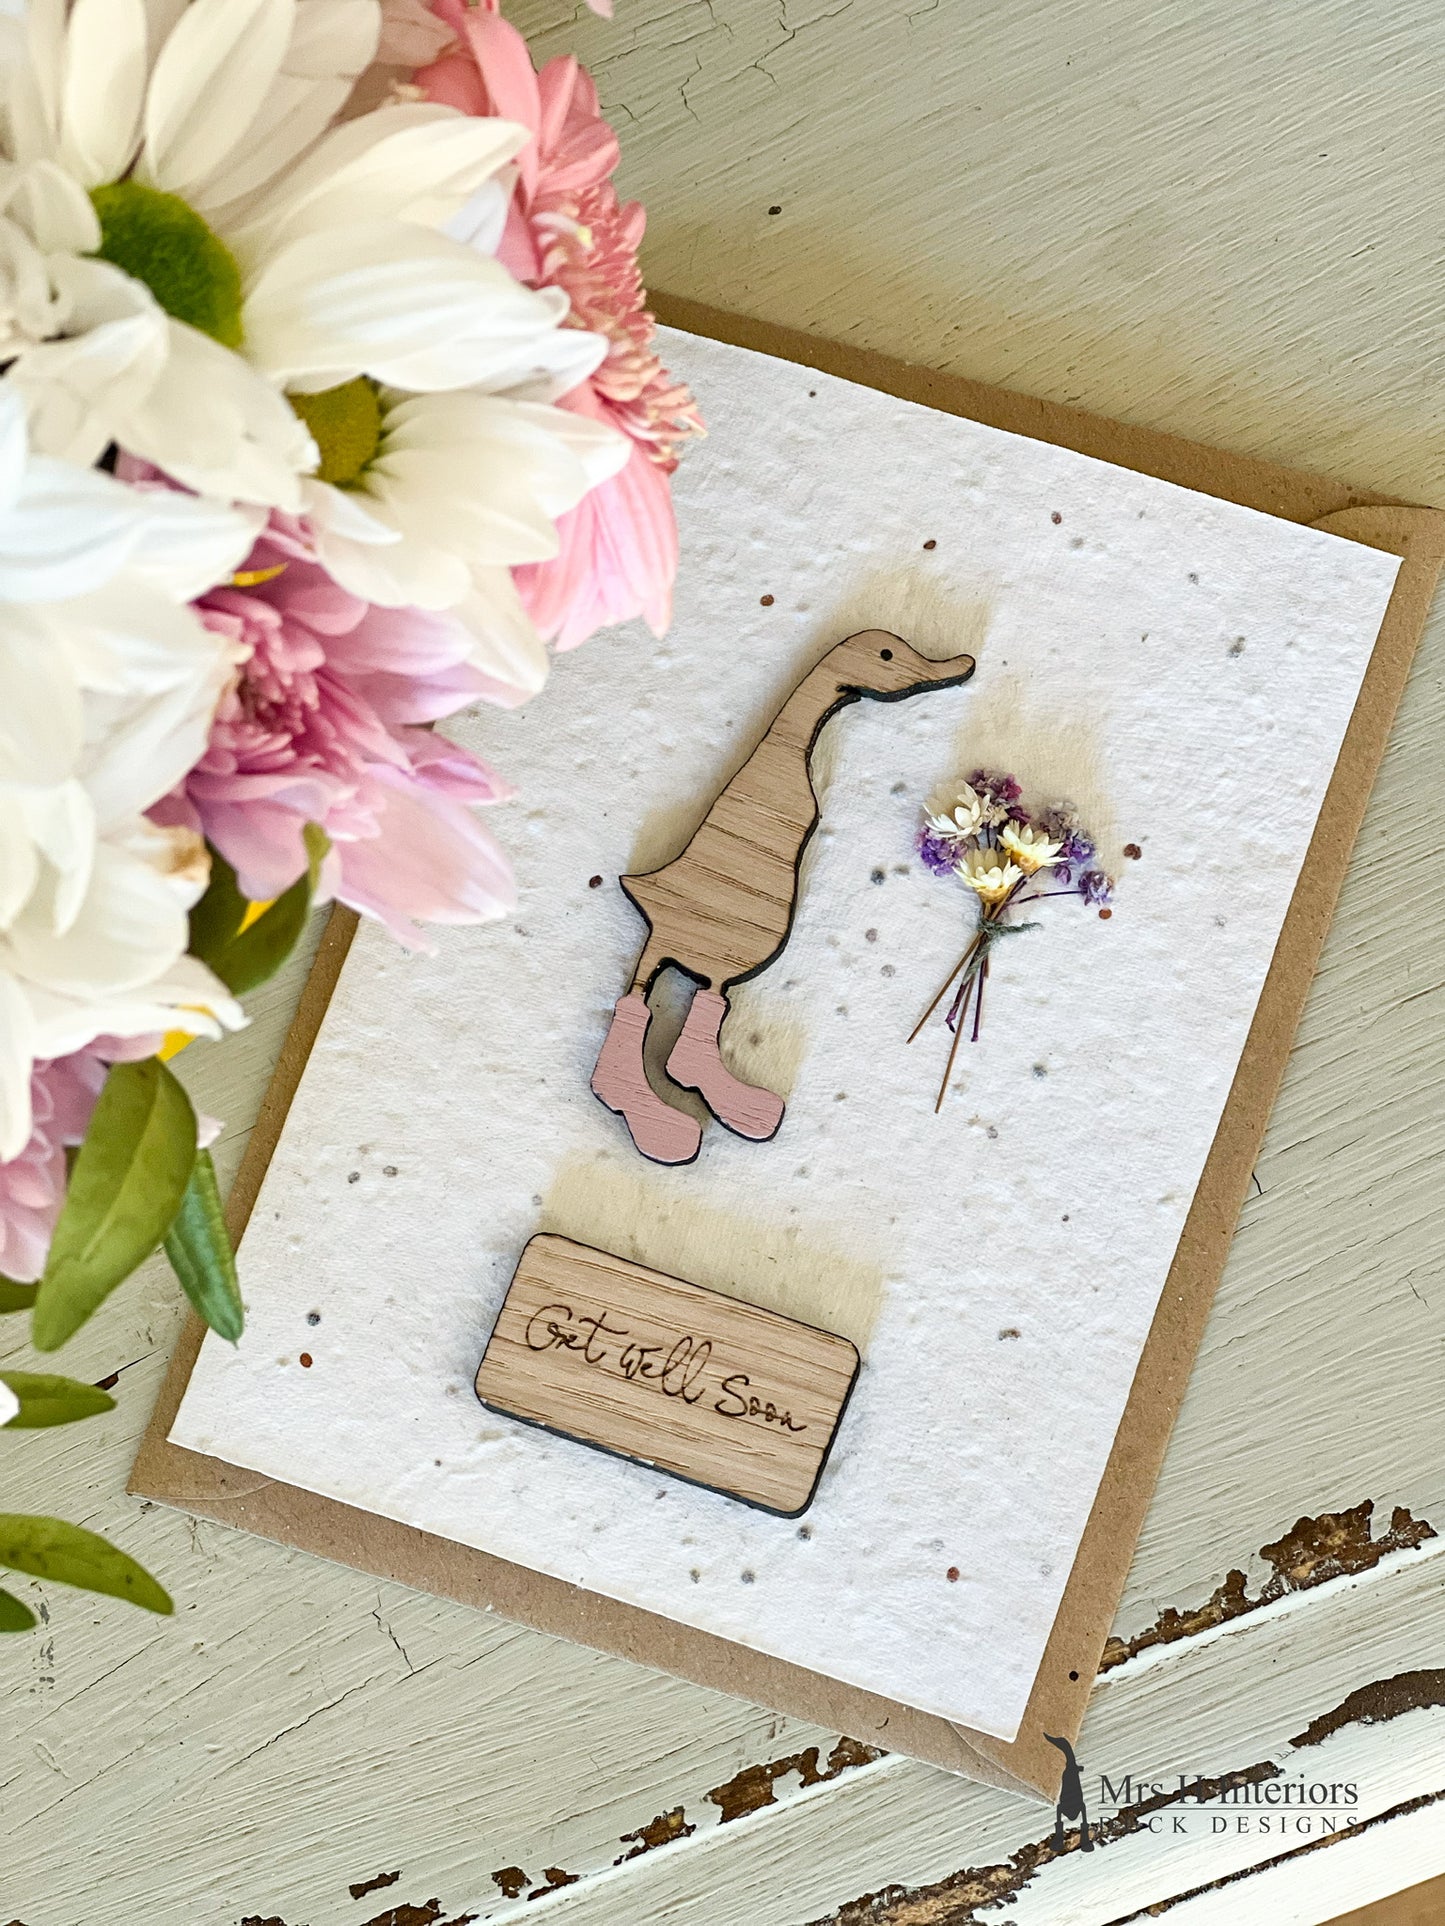 Get Well Soon - Duck with Flowers - Get Well Soon Card - Decorated Wooden Duck in Boots by Mrs H the Duck Lady